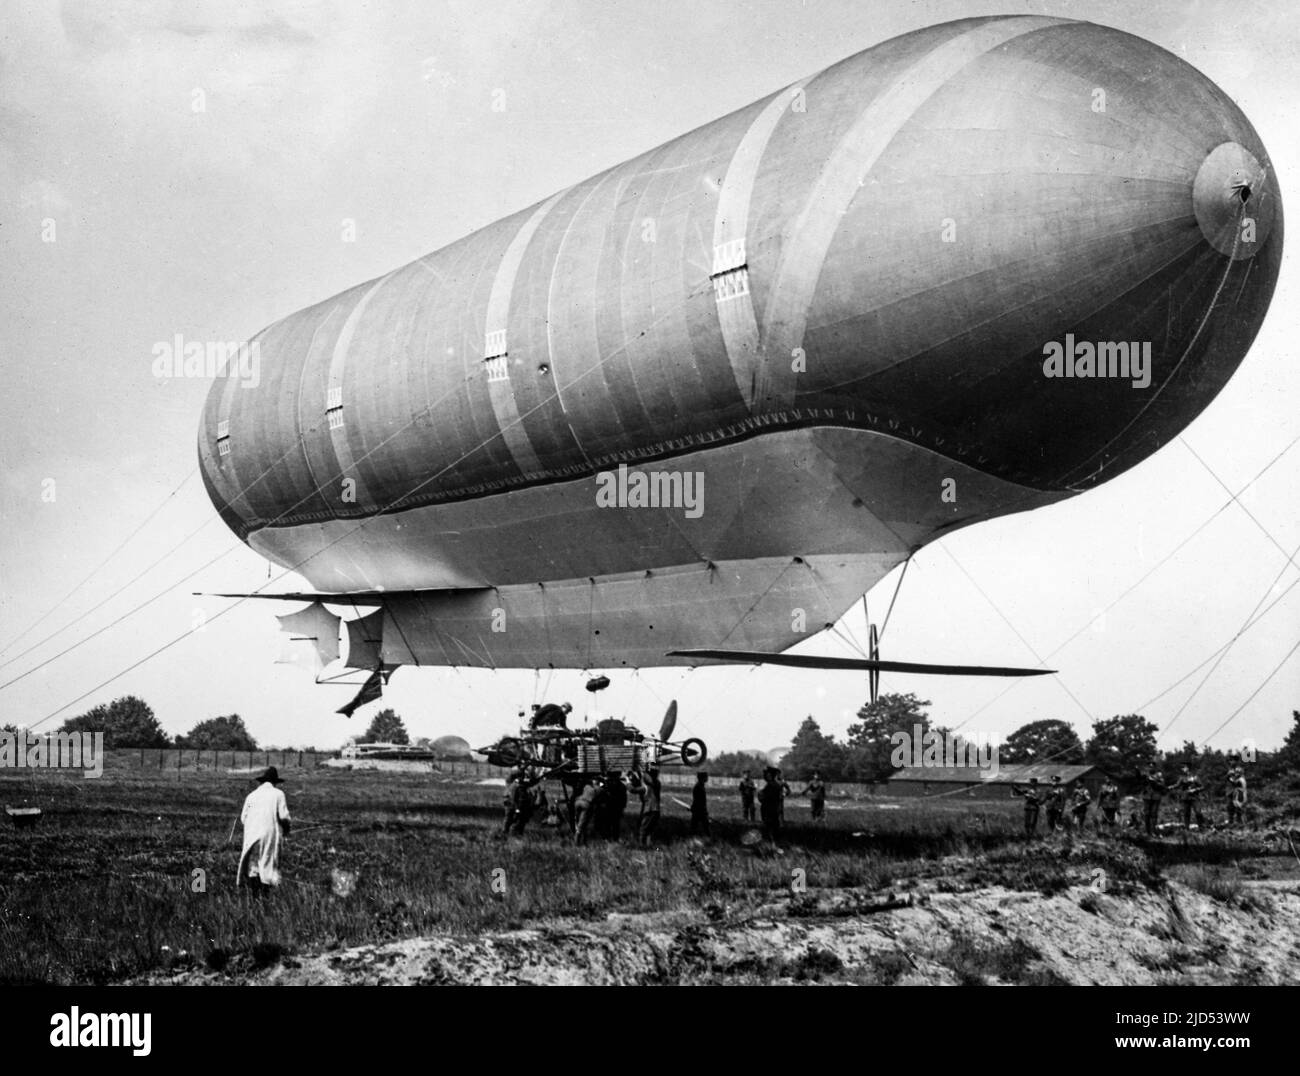 The British Army Dirigible Number 1 balloon known as Nulli Secundus. First flown at Farnborough in 1907, this photo was taken in 1908, and was scrapped later on that year. Stock Photo